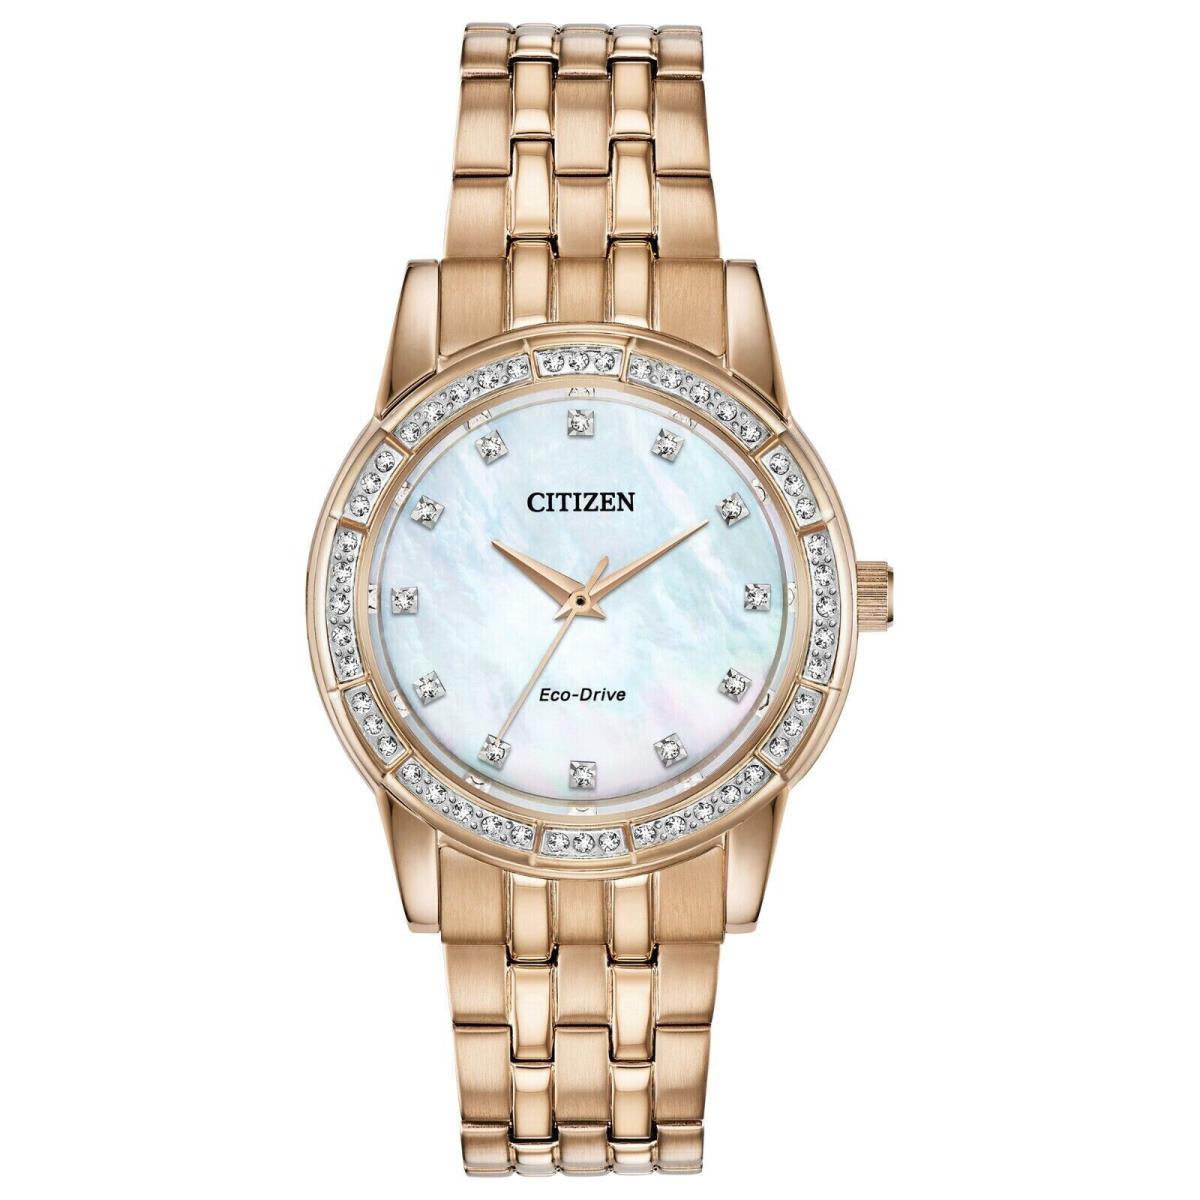 Citizen EM0773-54D Silhouette Crystal Mother-of-pearl Dial Eco-drive Watch - Dial: Mother-of-pearl, Band: Rose Gold, Bezel: Rose Gold